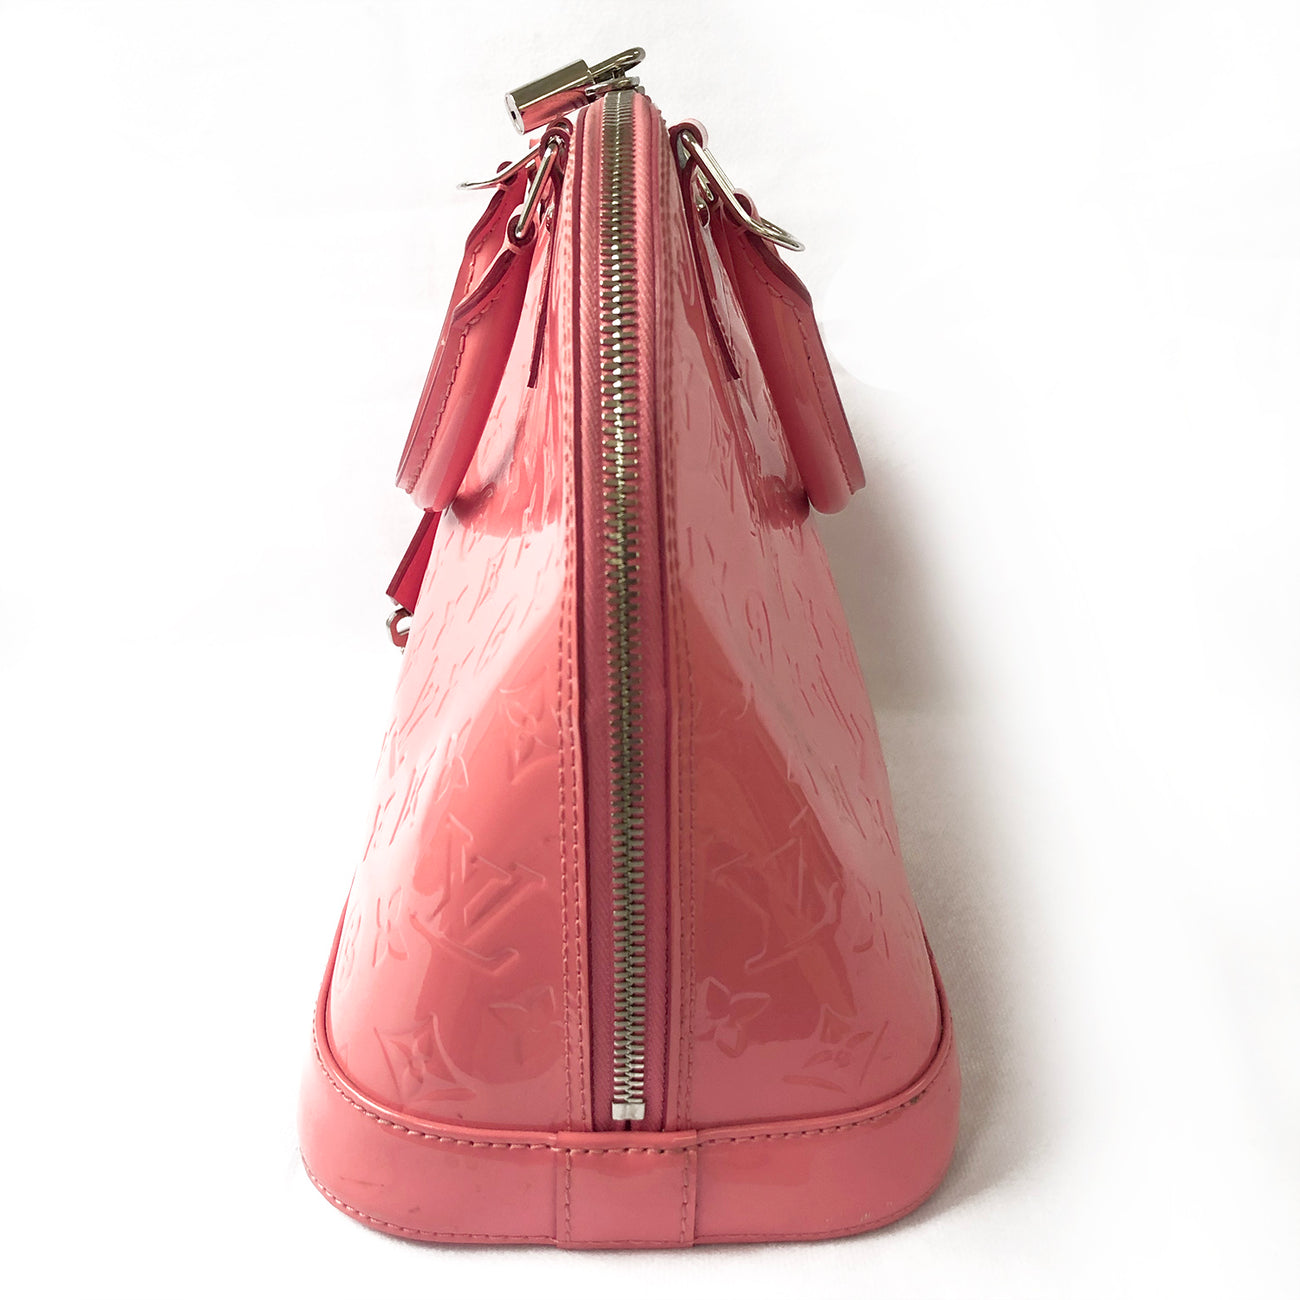 LOUIS VUITTON, Alma PM in pink patent leather For Sale at 1stDibs